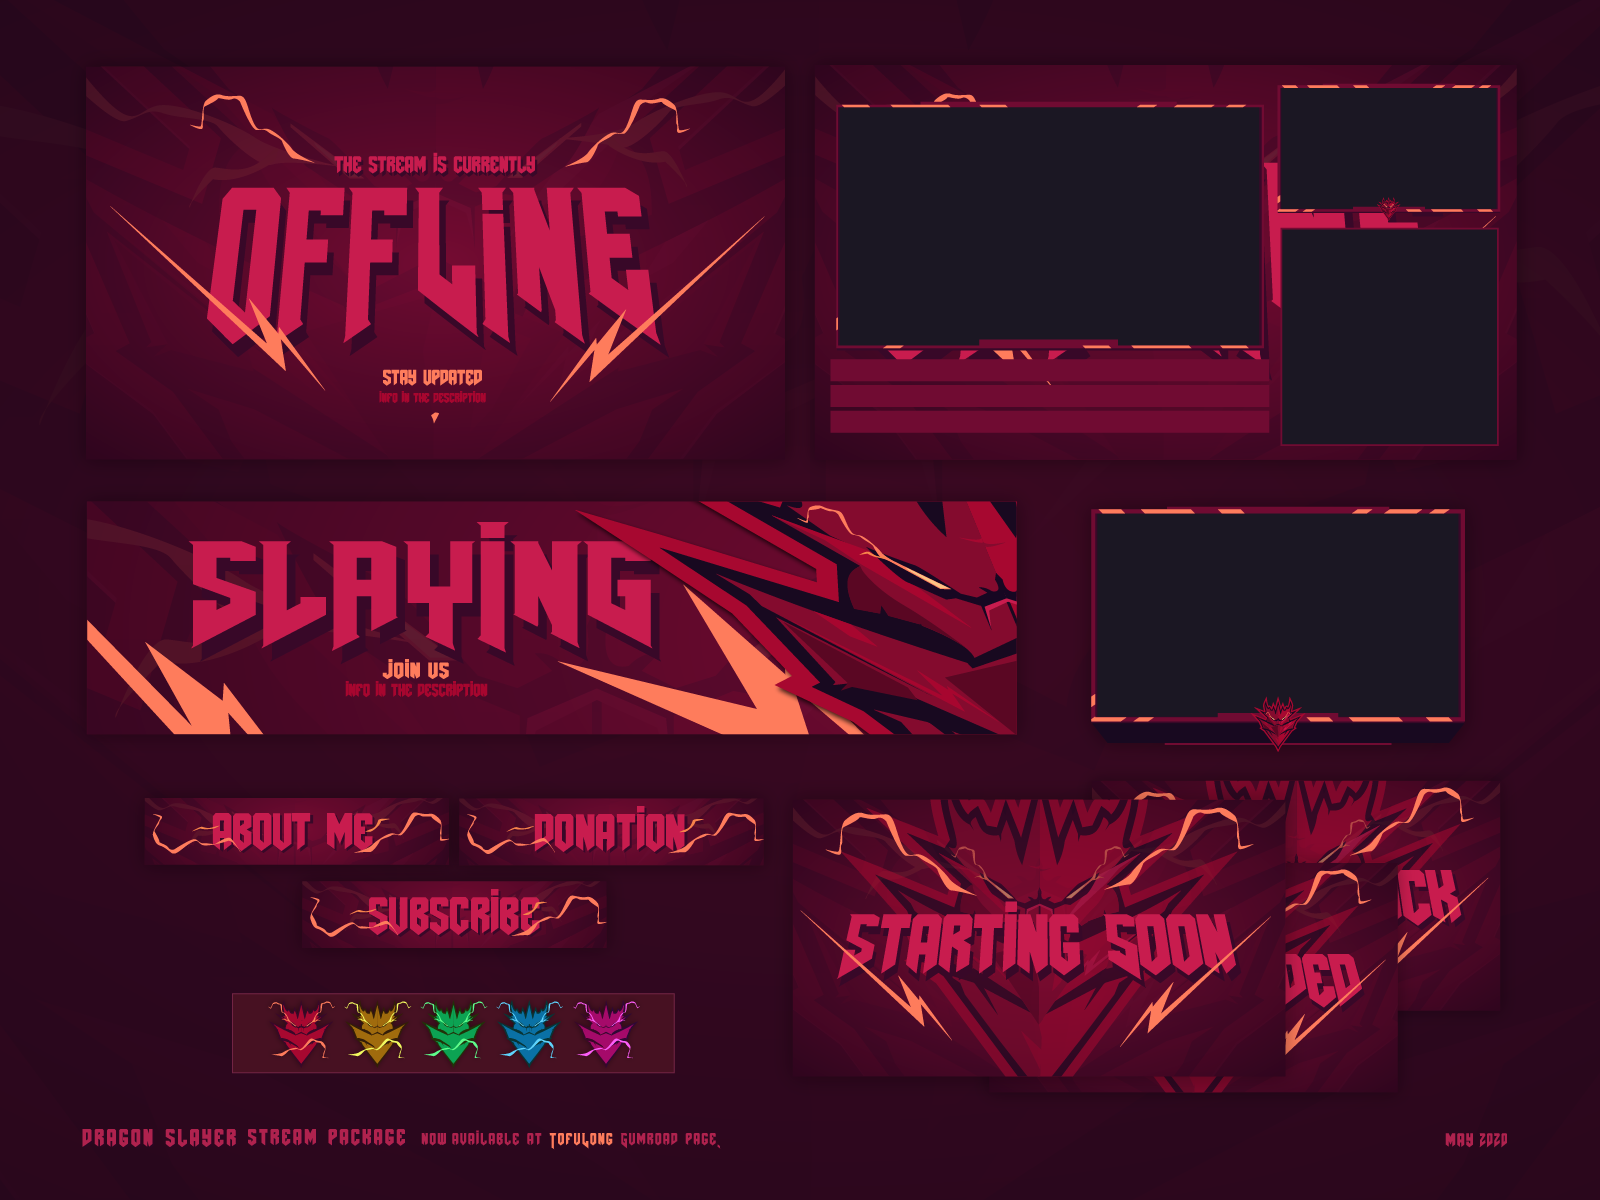 Epic Twitch Overlay For Streamers - Dragon Slayer by TofuLong on Dribbble